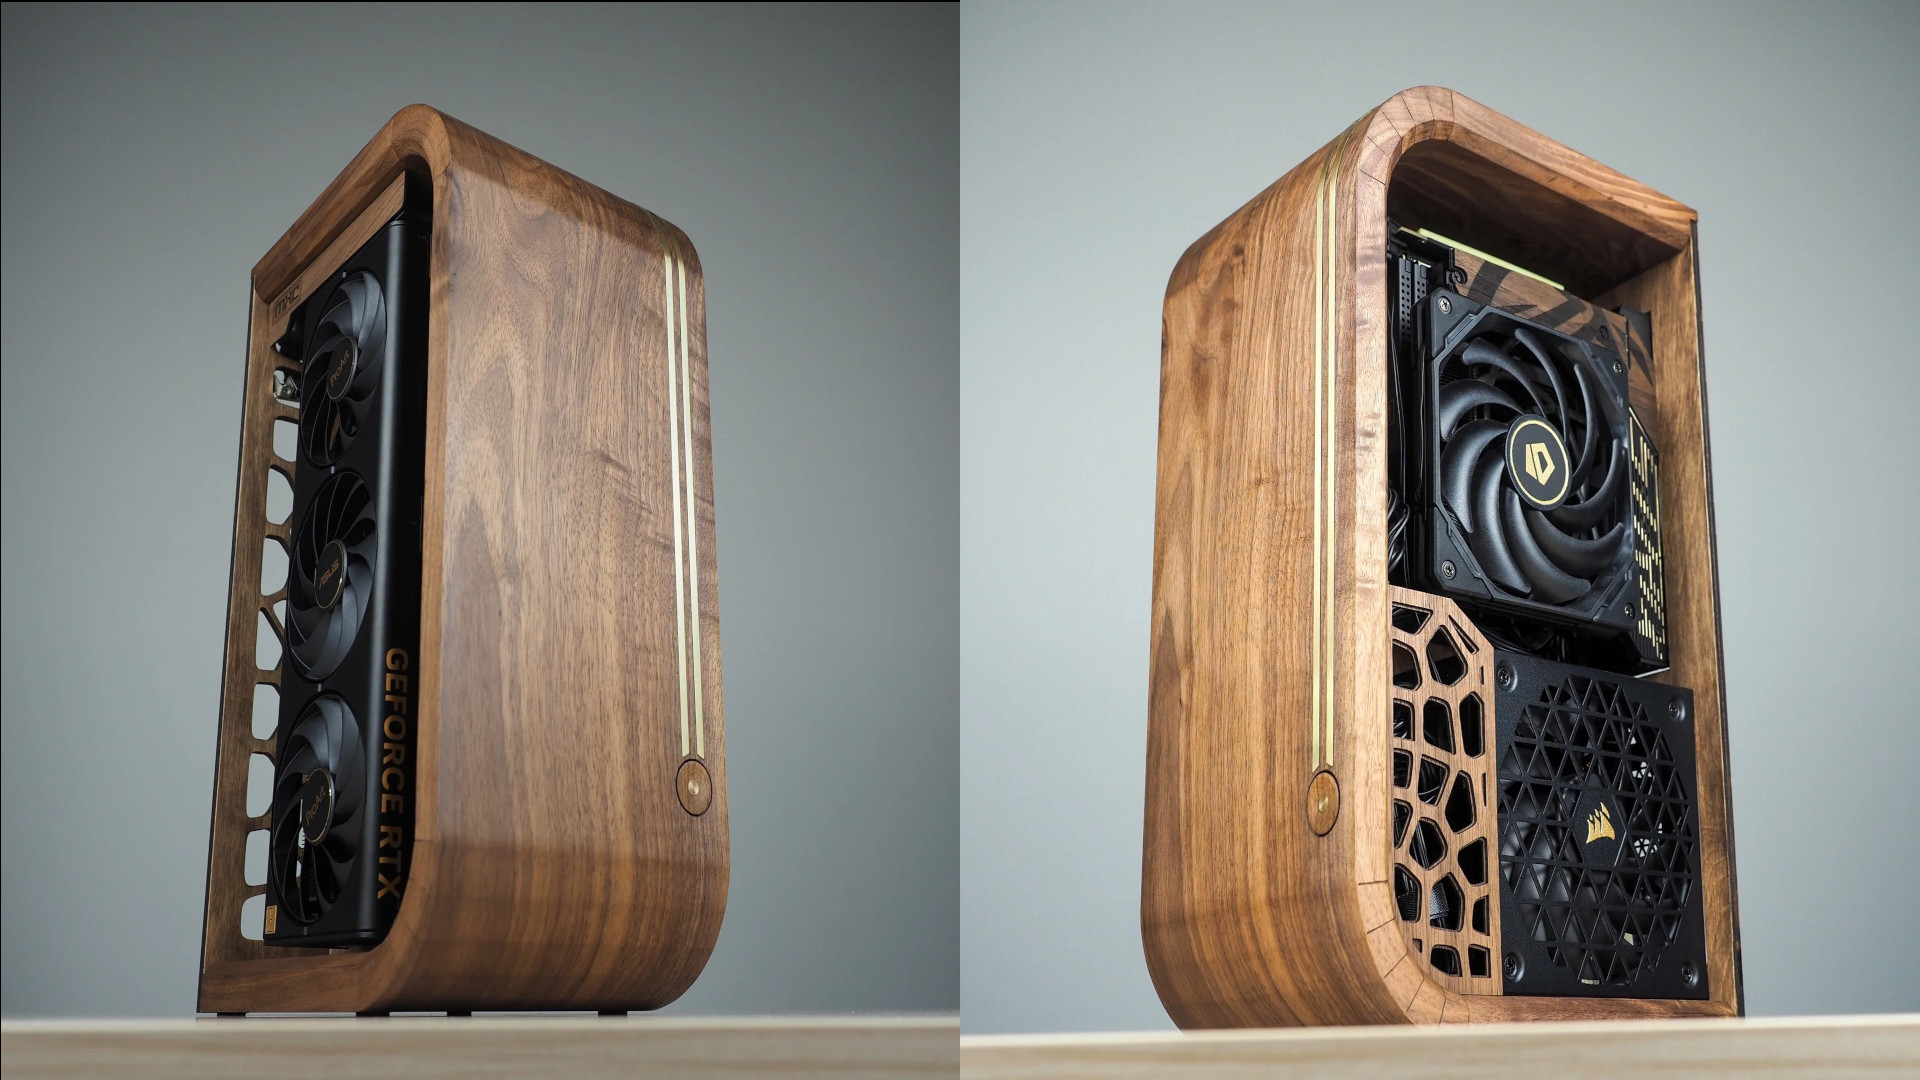 The front and back of the wood gaming PC